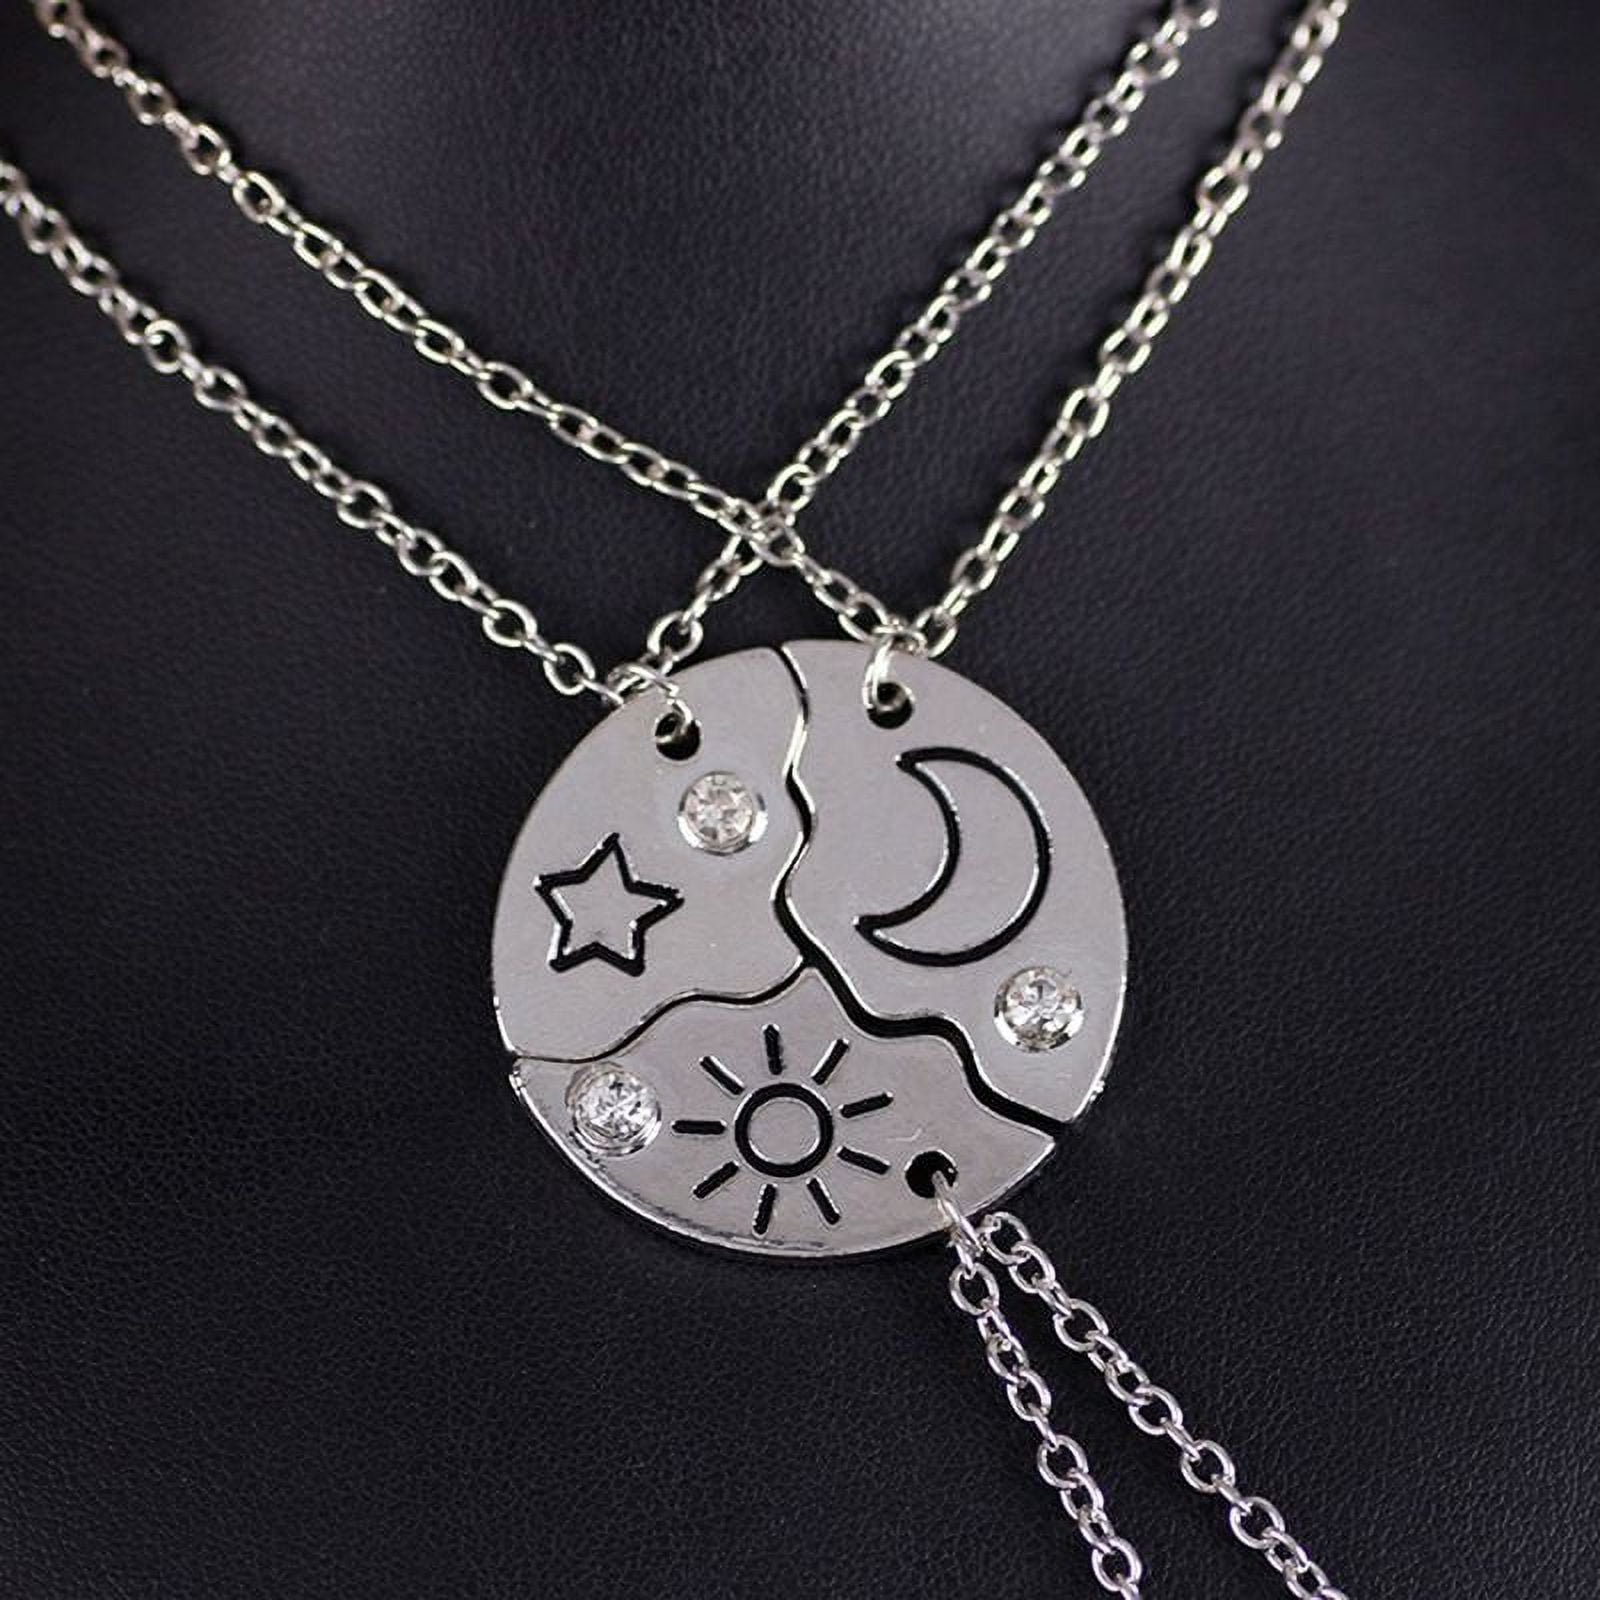 3pcs Whimsigoth Sun & Moon & Star Choker Necklace for Music Festival/Live House Party/Clubbing Vacation Beach,One Size/Black